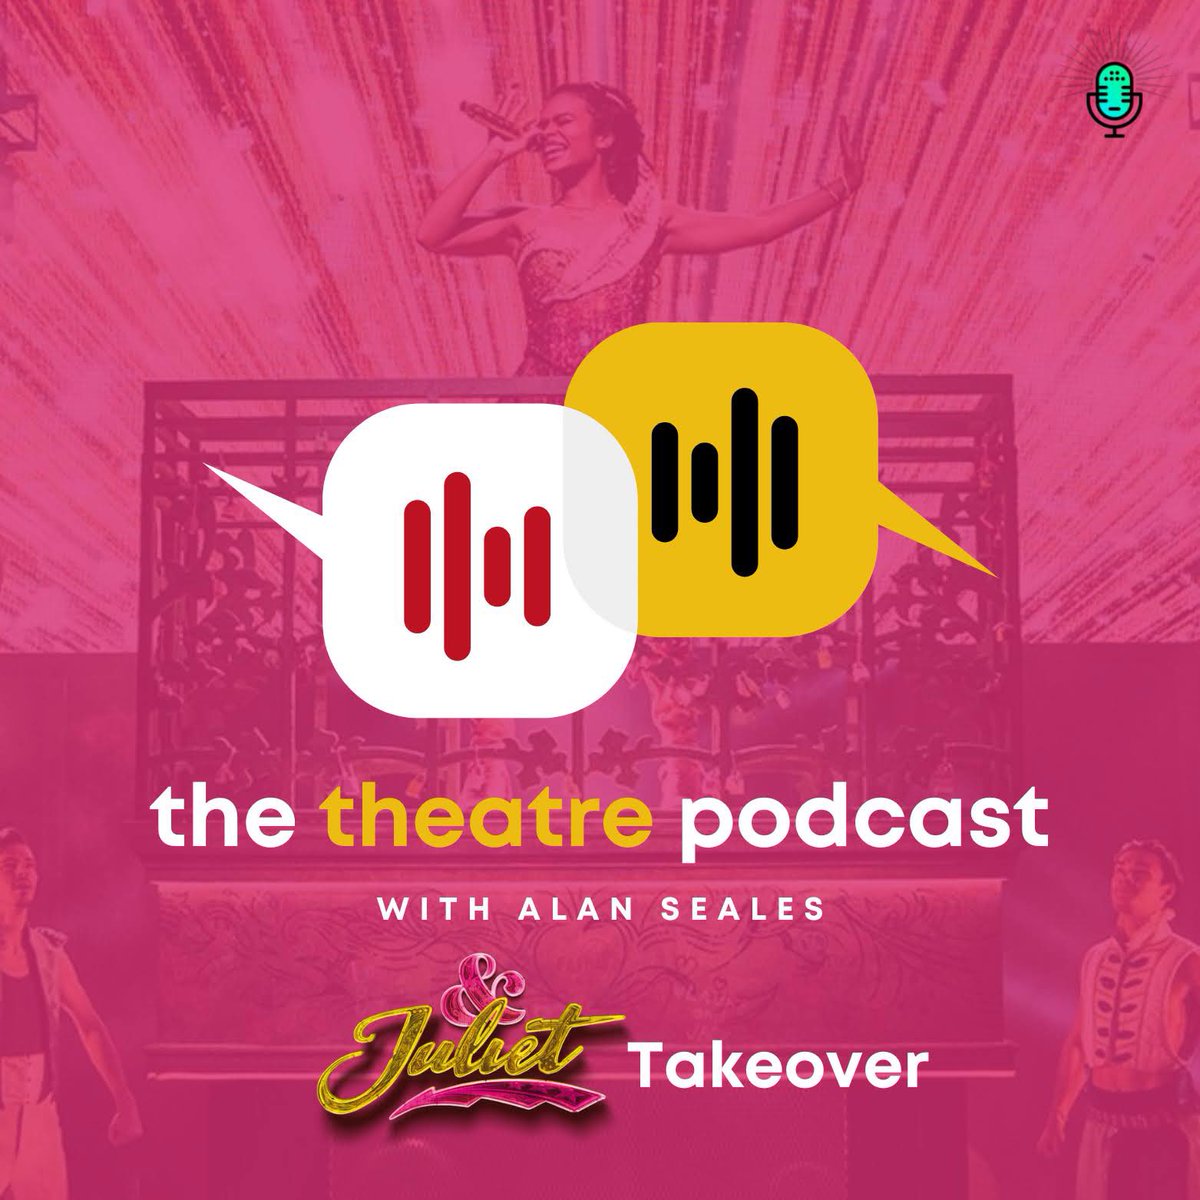 Congrats to the entire team over at @AndJulietBway !! Head to bpn.fm/ttp to listen to the beginning of the podcast takeover!!